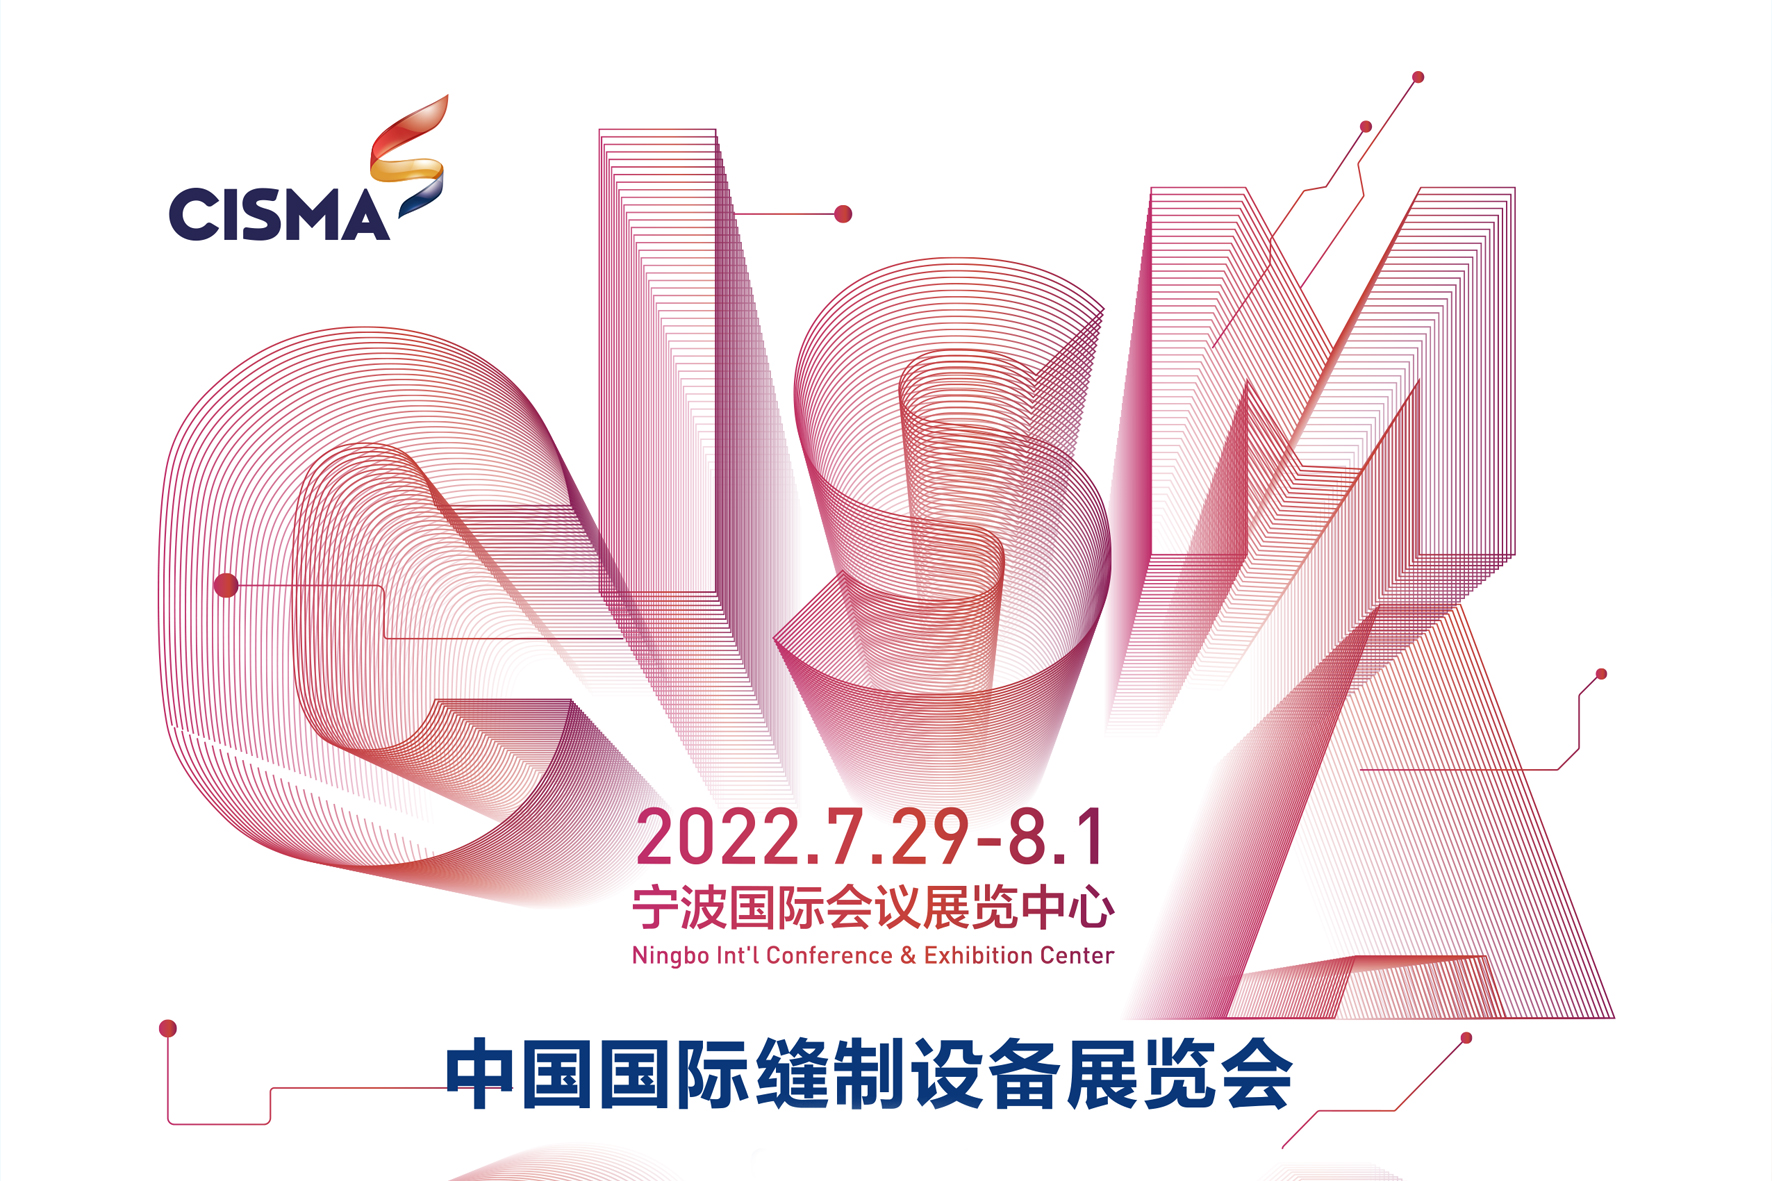 Cisma2021 comes to a successful conclusion. Thank you for your trust and support